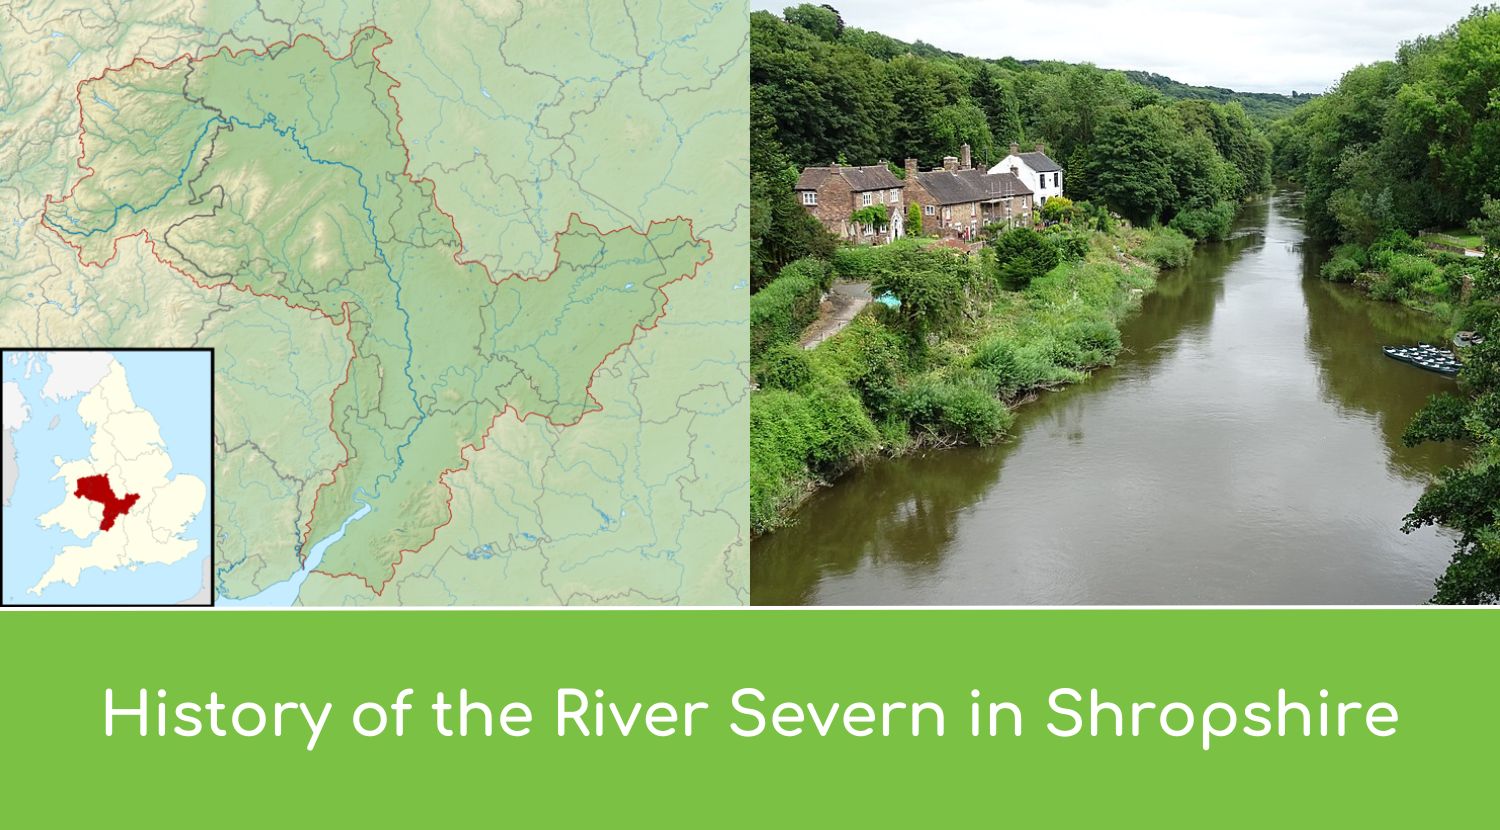 History of the River Severn in Shropshire